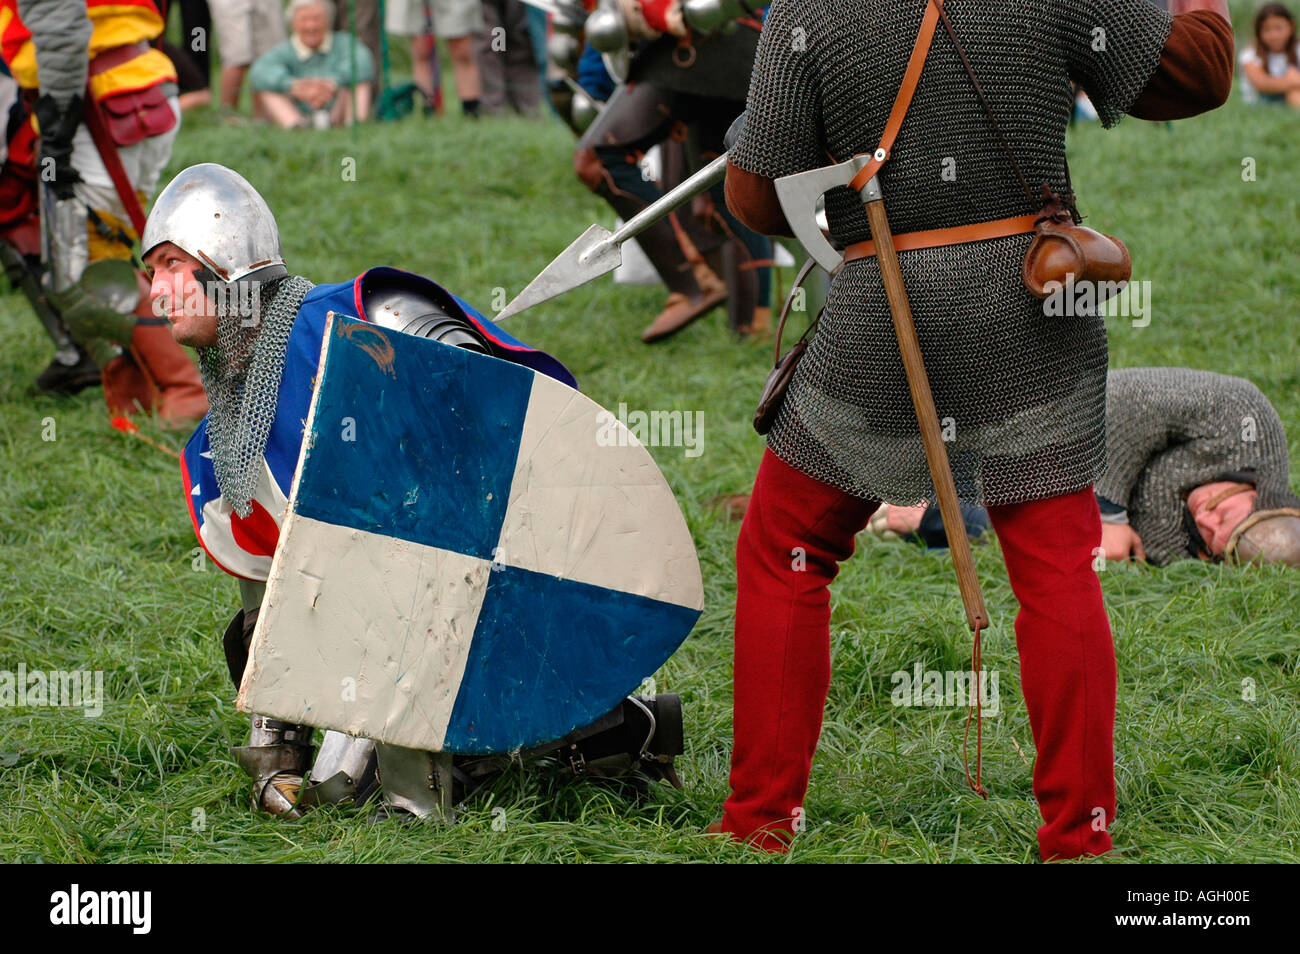 Battle reenactment, The Plantagenet Medieval Society recreate life in the 14th century in display at Goodrich Castle England UK Stock Photo